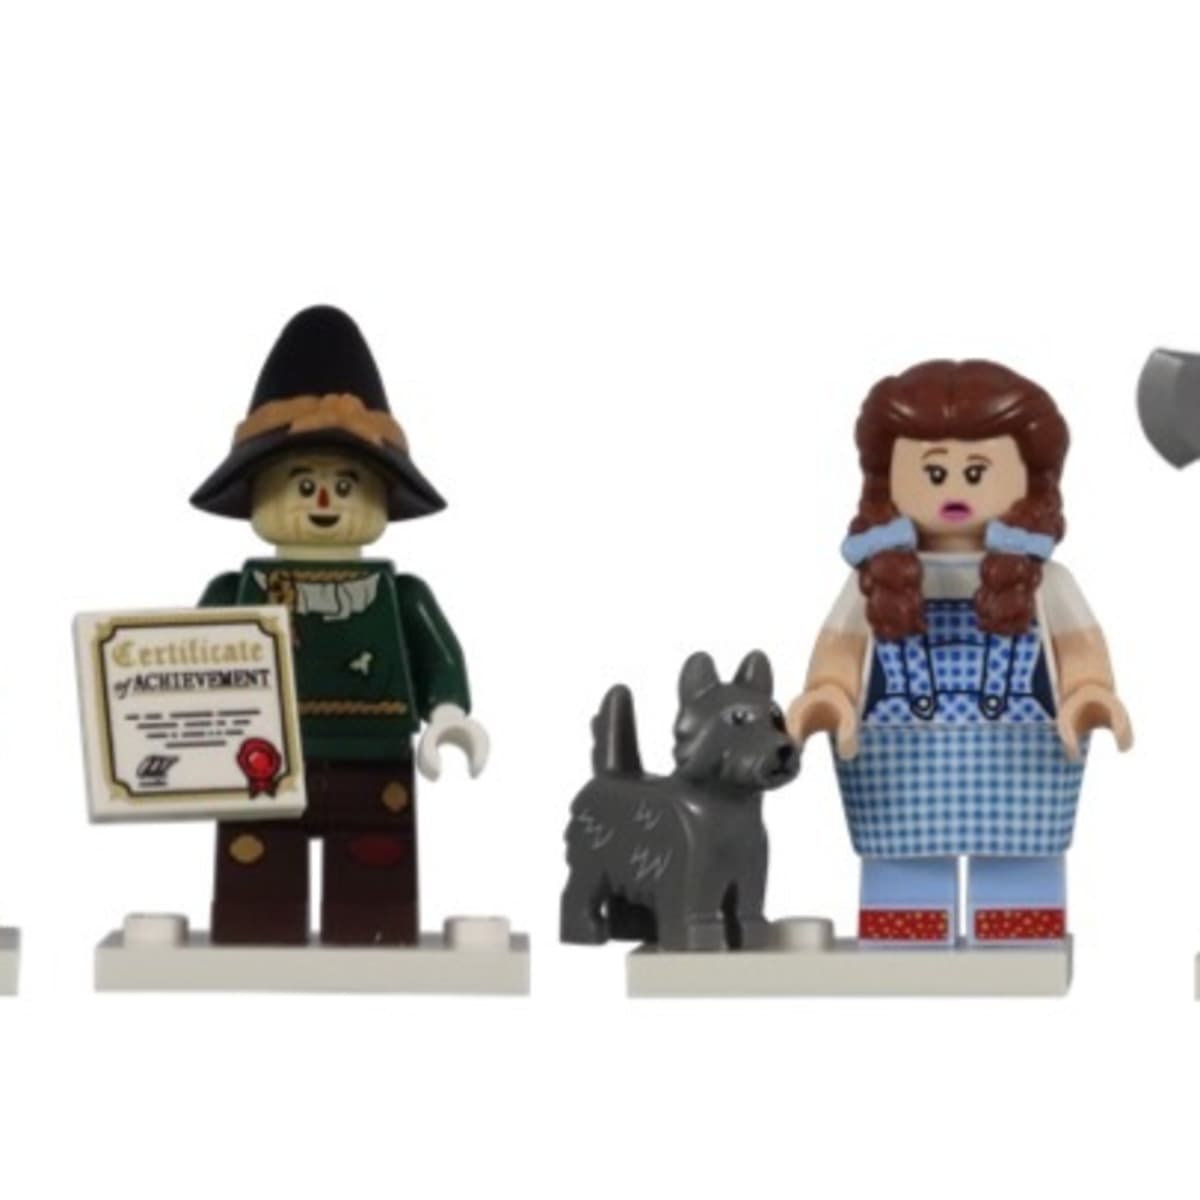 LEGO Wizard of Oz Minifigures From 